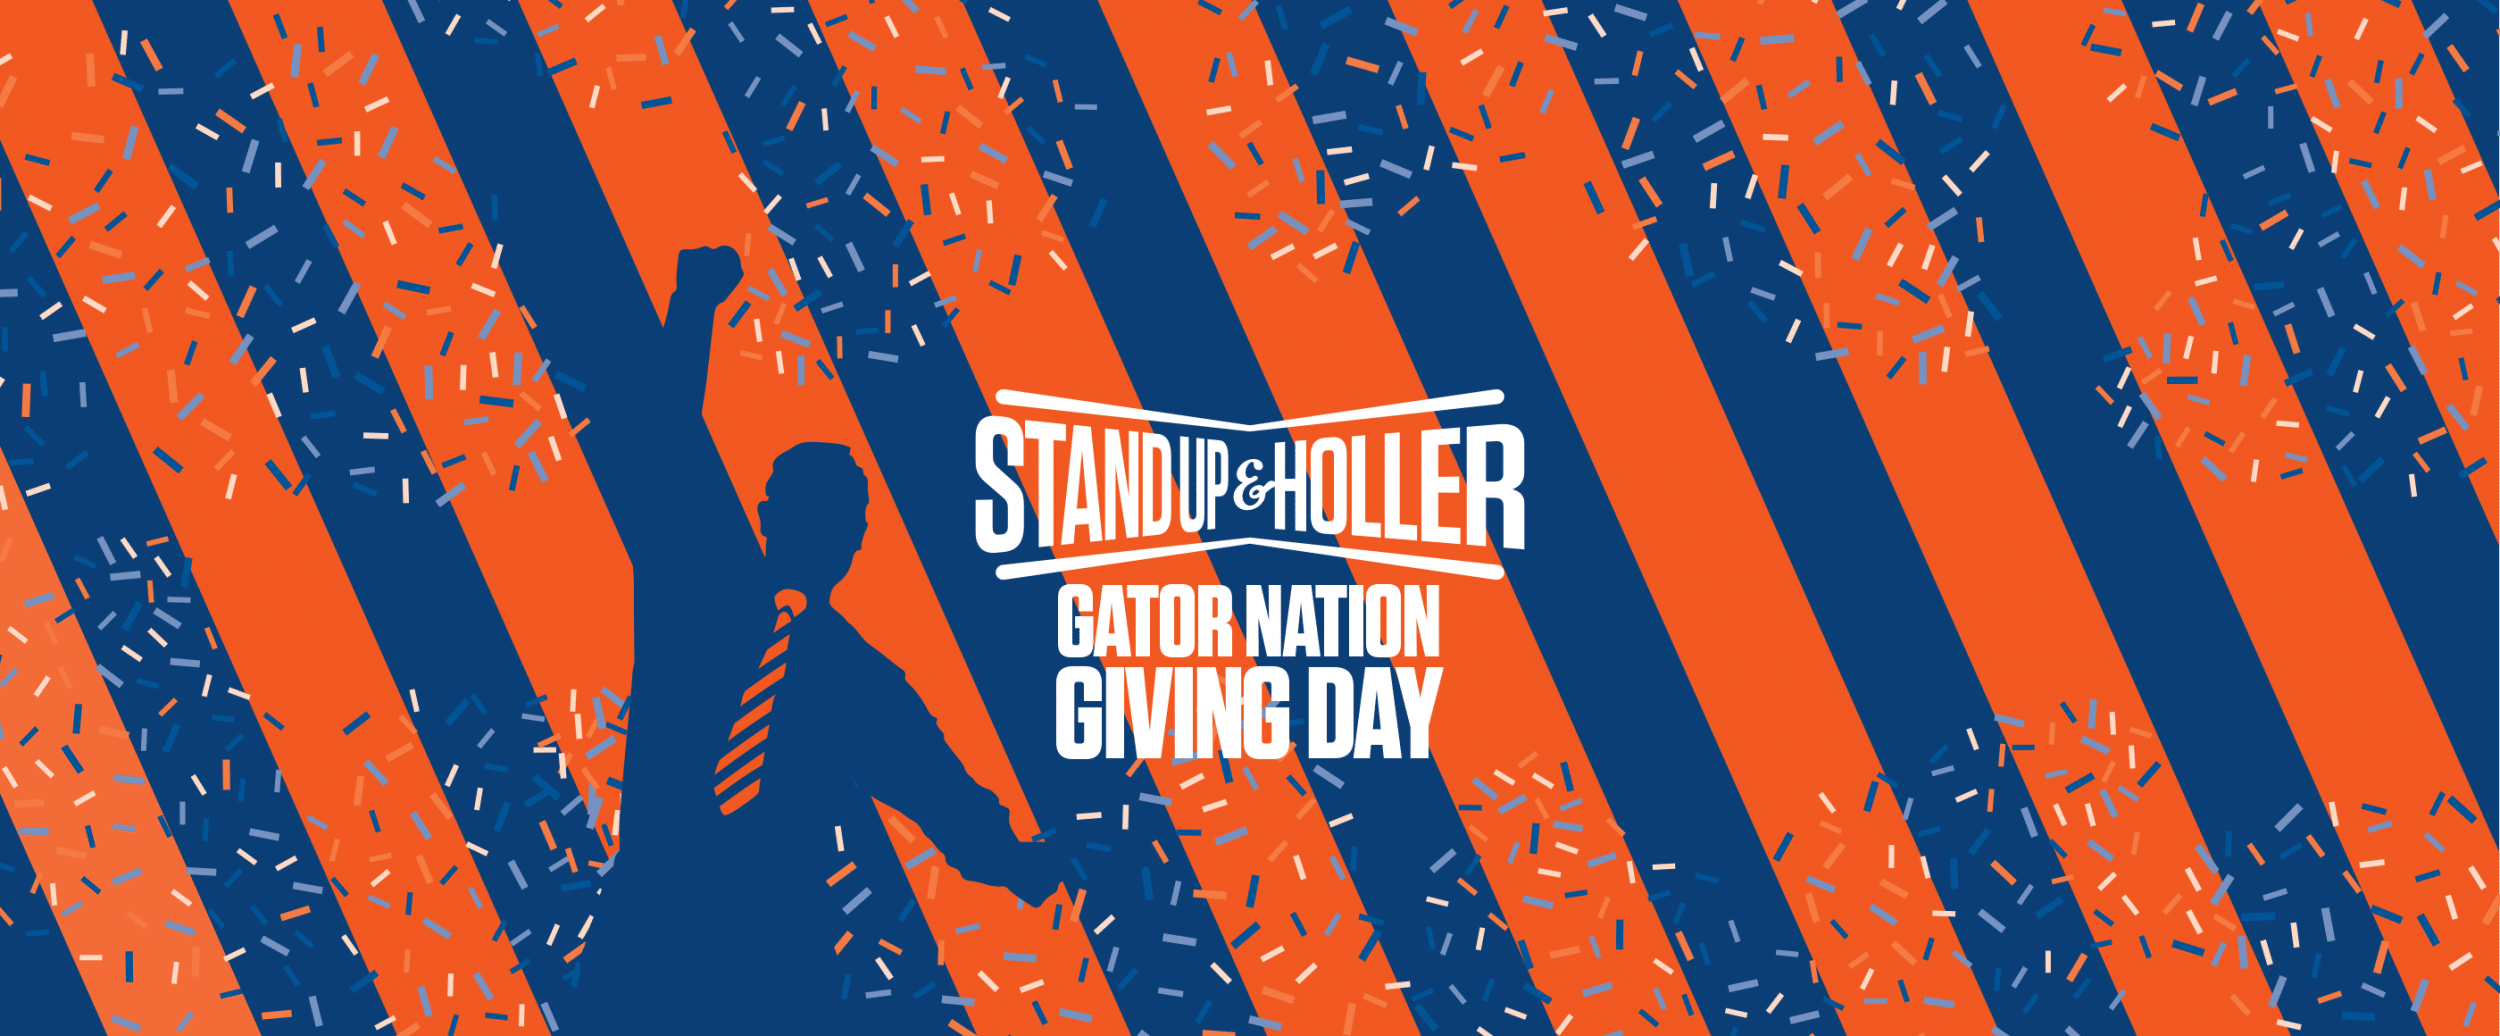 Gator Nation Giving Day